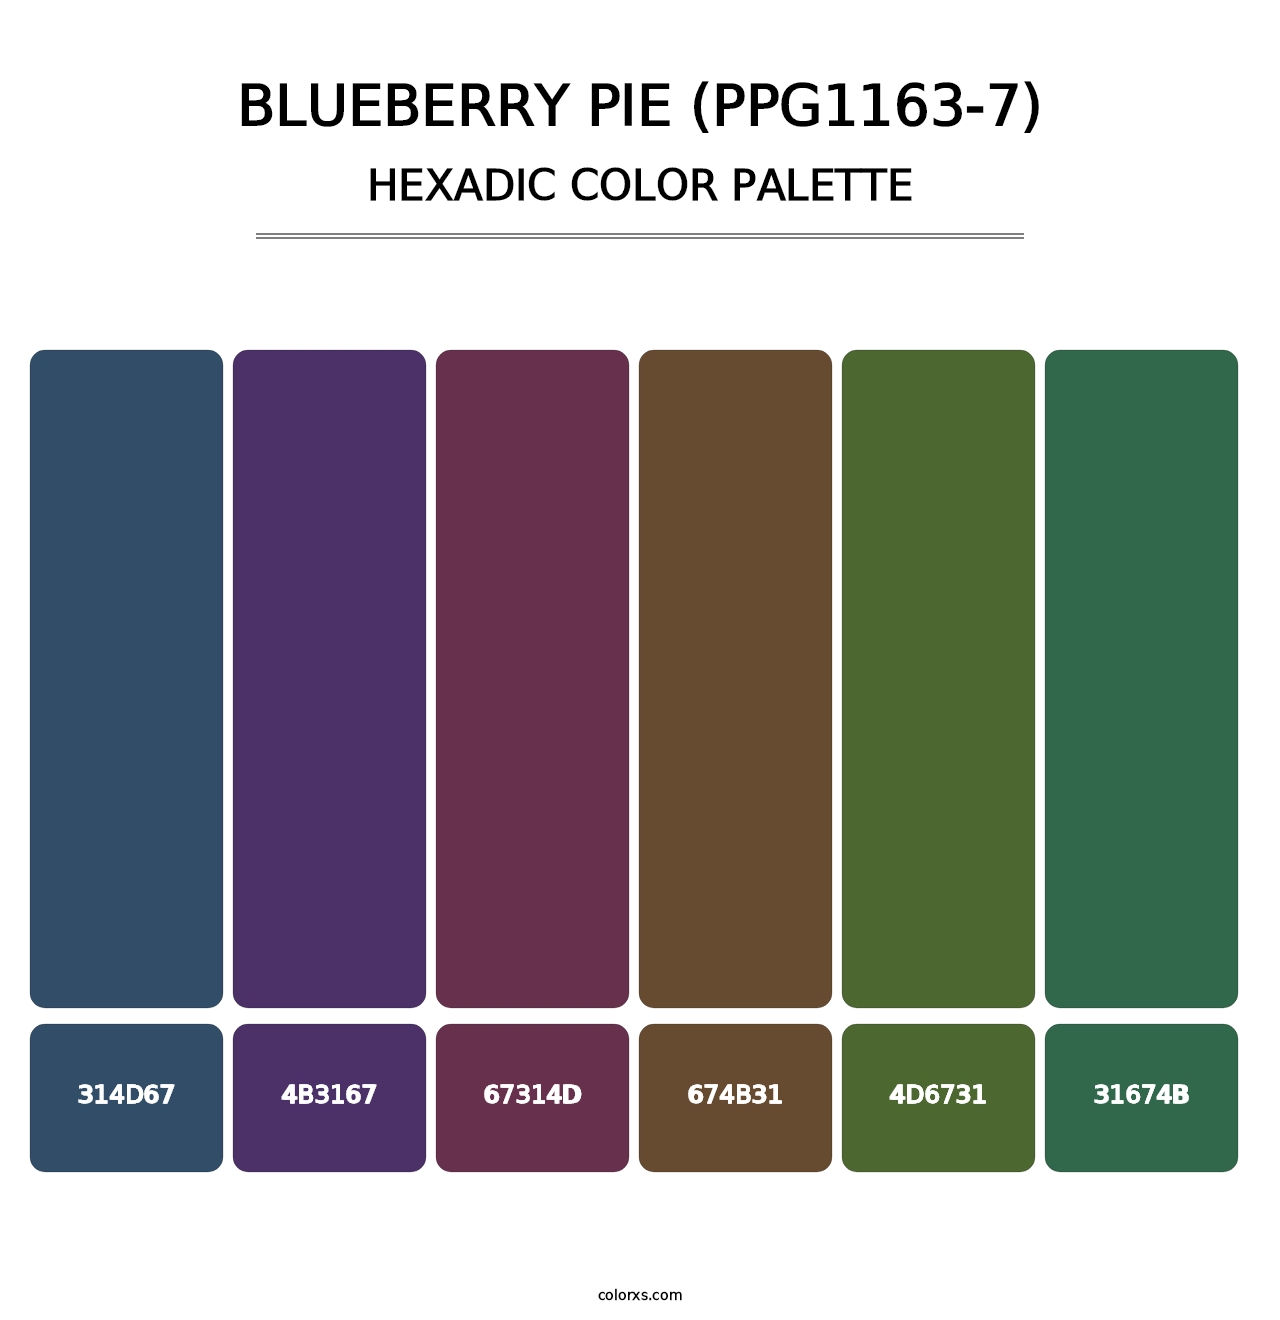 Blueberry Pie (PPG1163-7) - Hexadic Color Palette